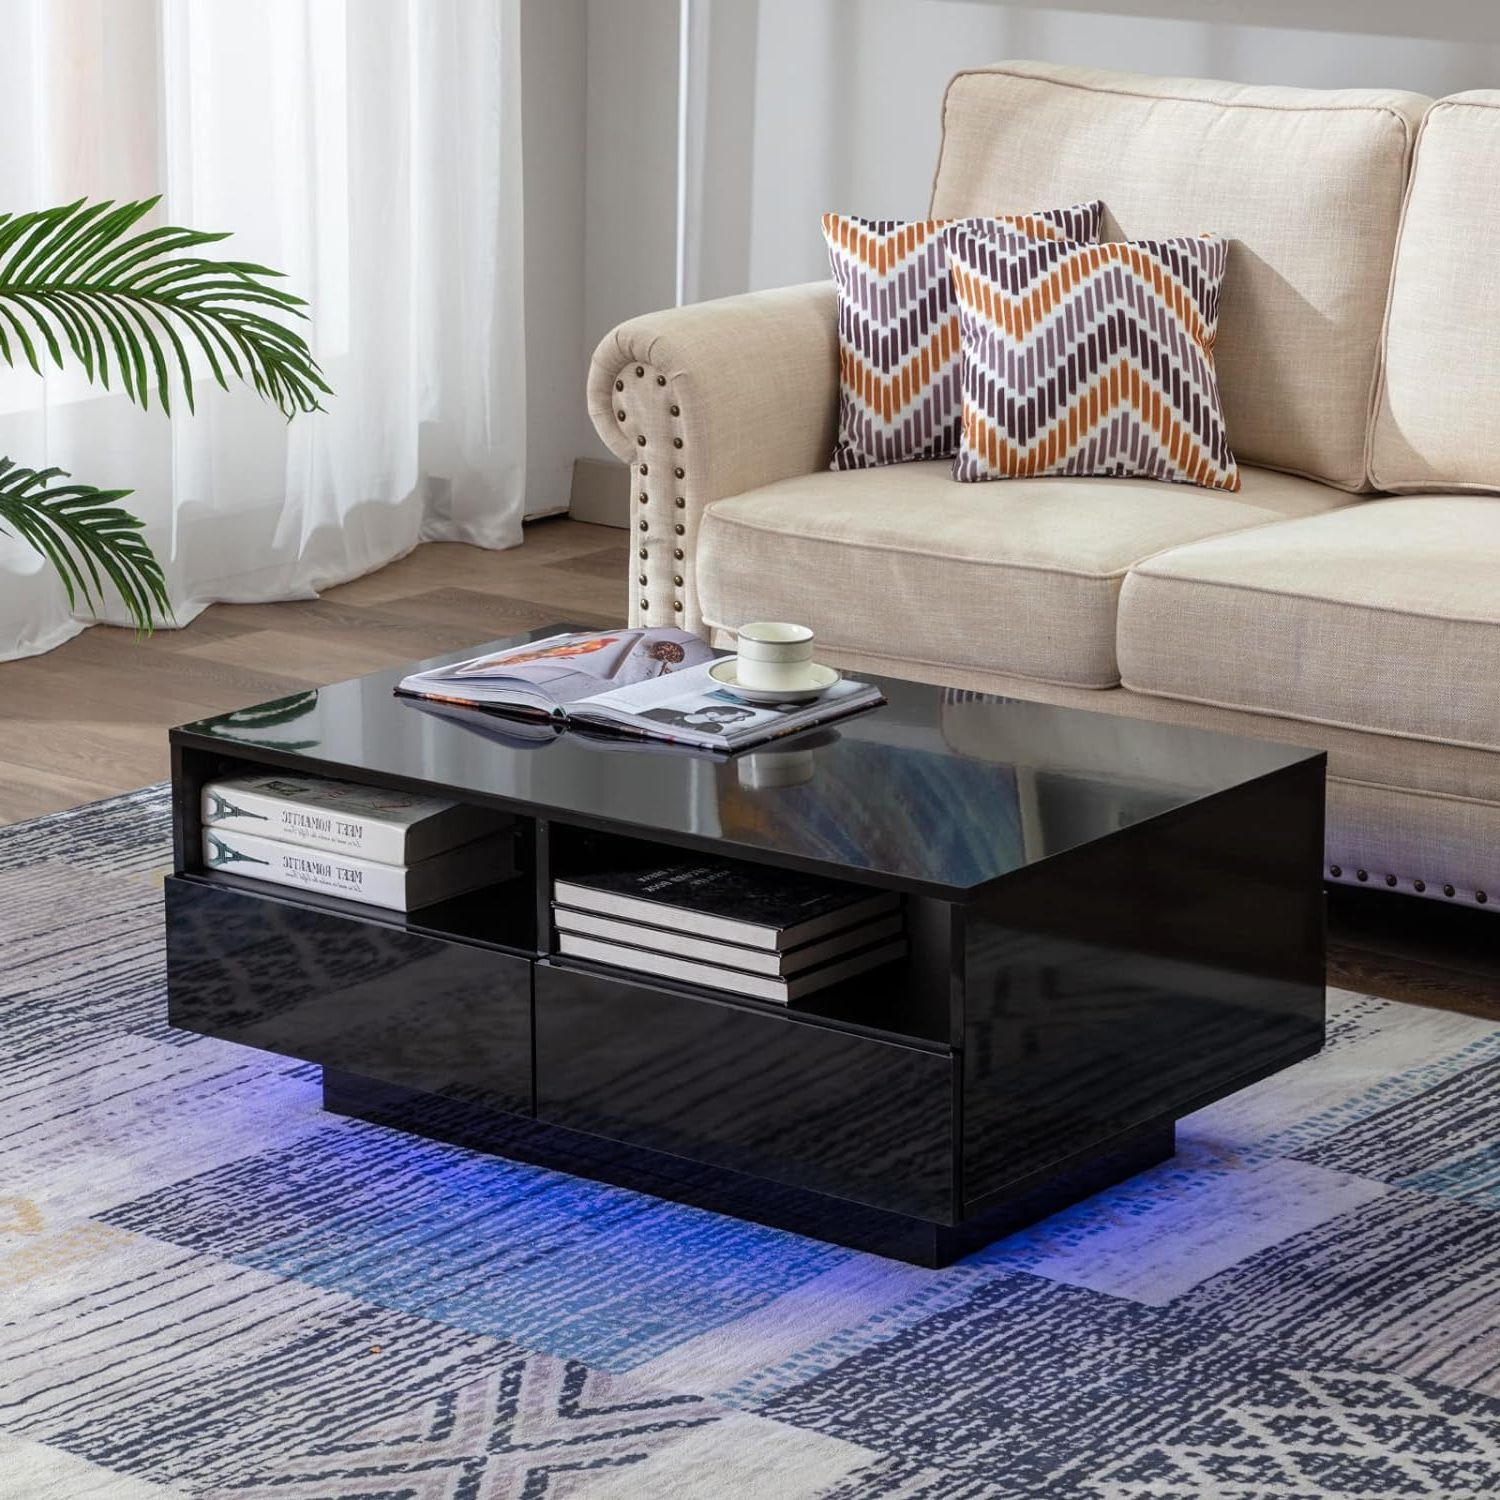 Buy Vastair Led Coffee Table For Living Room – Modern High Gloss Coffee Within Fashionable Led Coffee Tables With 4 Drawers (View 4 of 15)